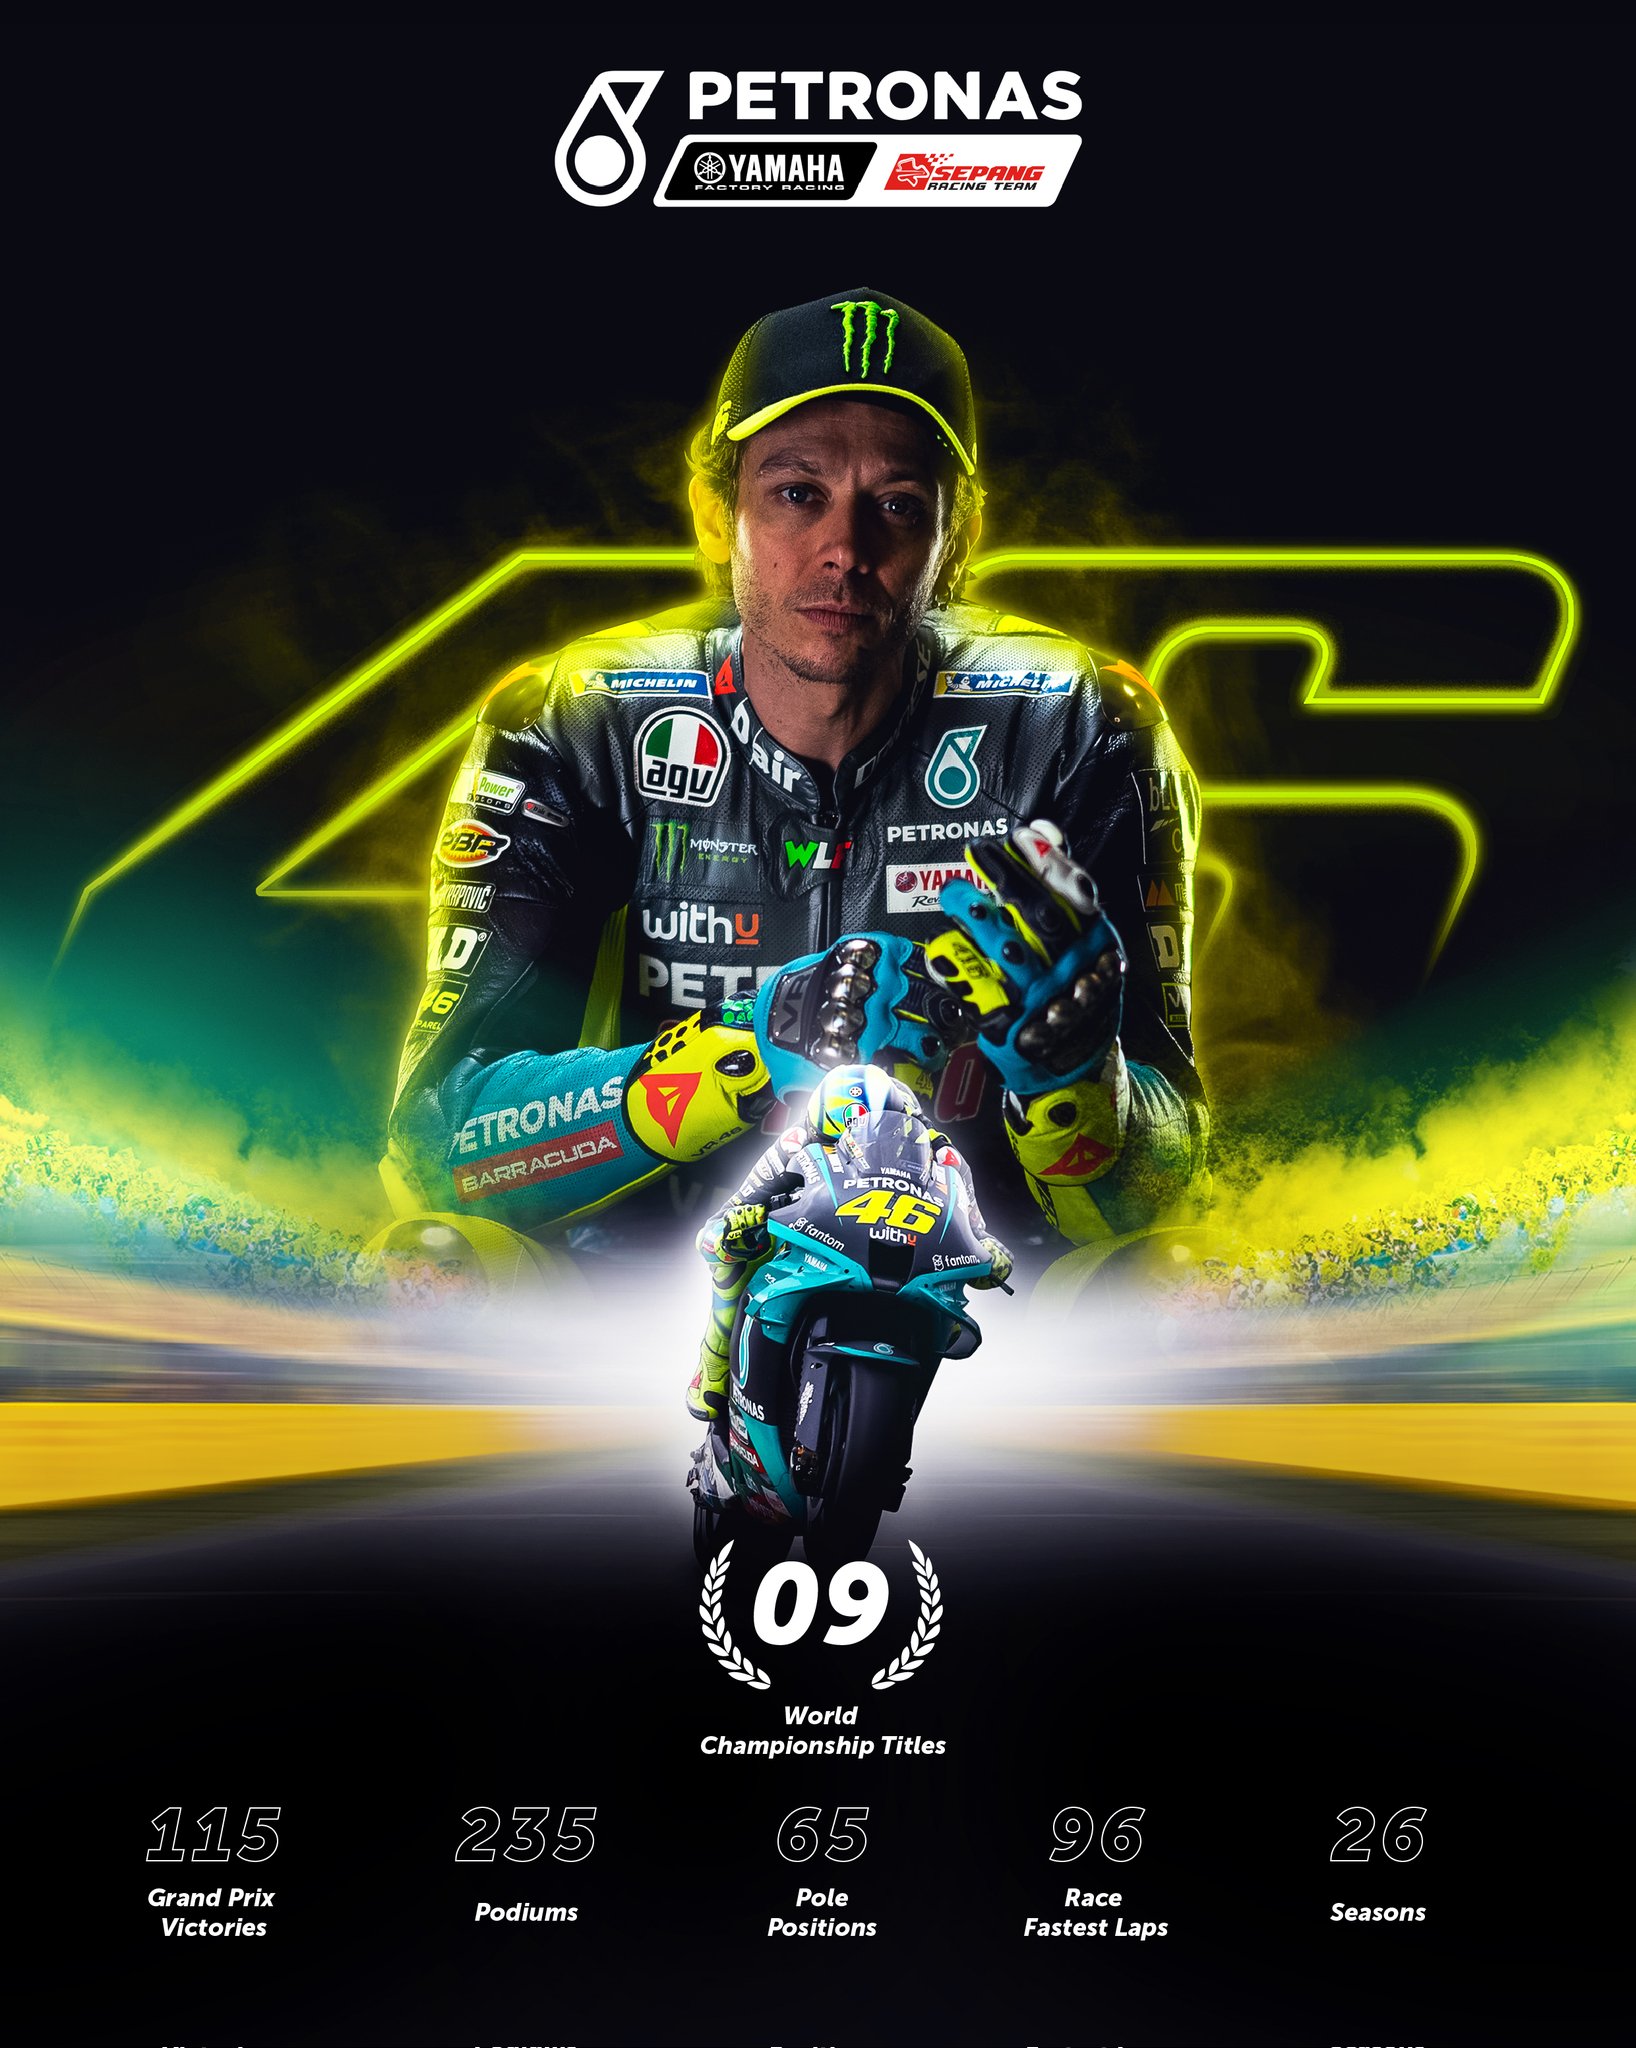 Moto GP 2021 - Page 4 E8C6Zy0XoAMWPSM?format=jpg&name=large